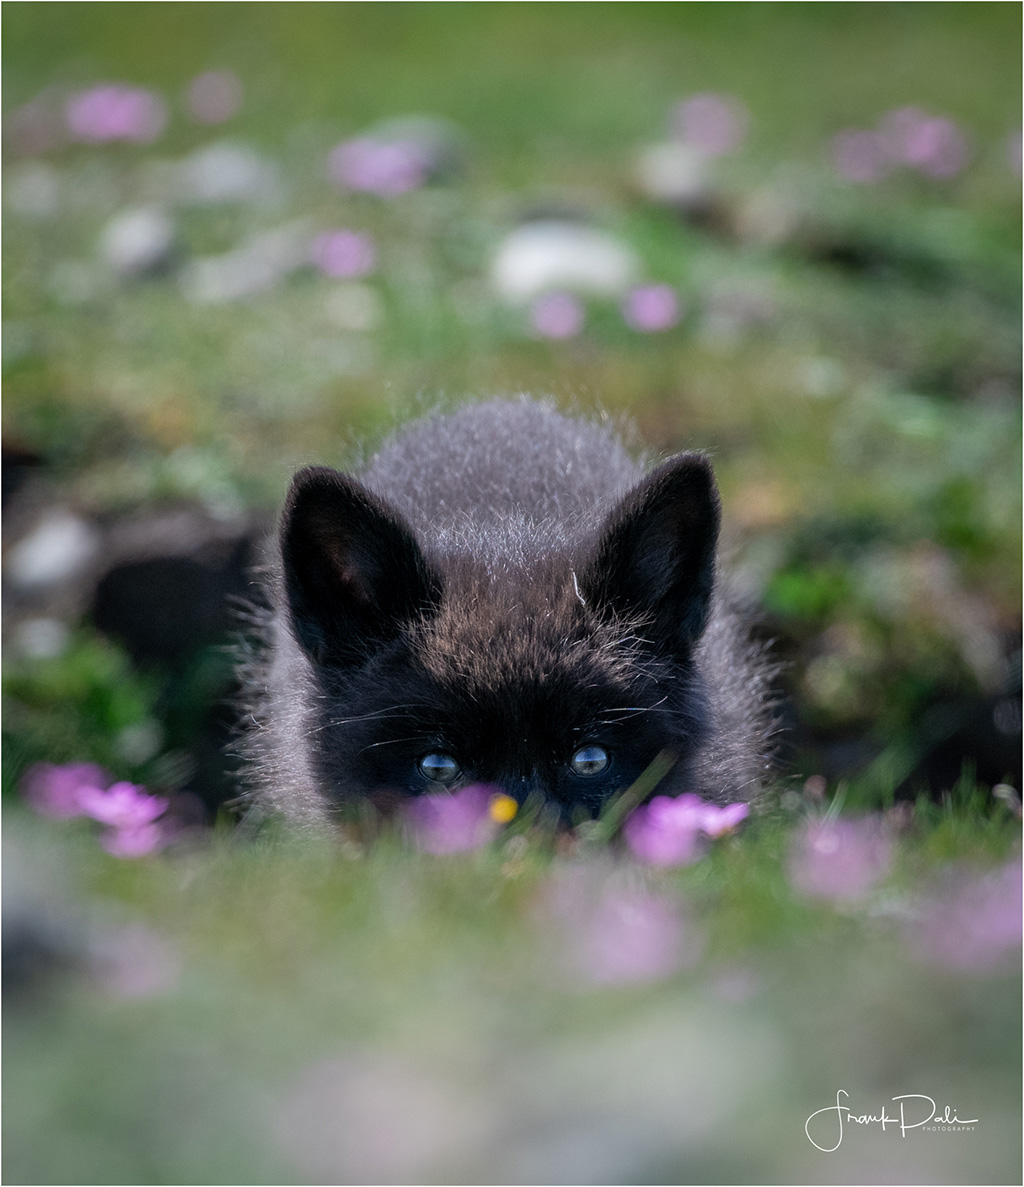 Today’s Photo Of The Day is “Blue Eyes” by Frank Pali. Location: Friday Harbor, San Juan County, Washington.